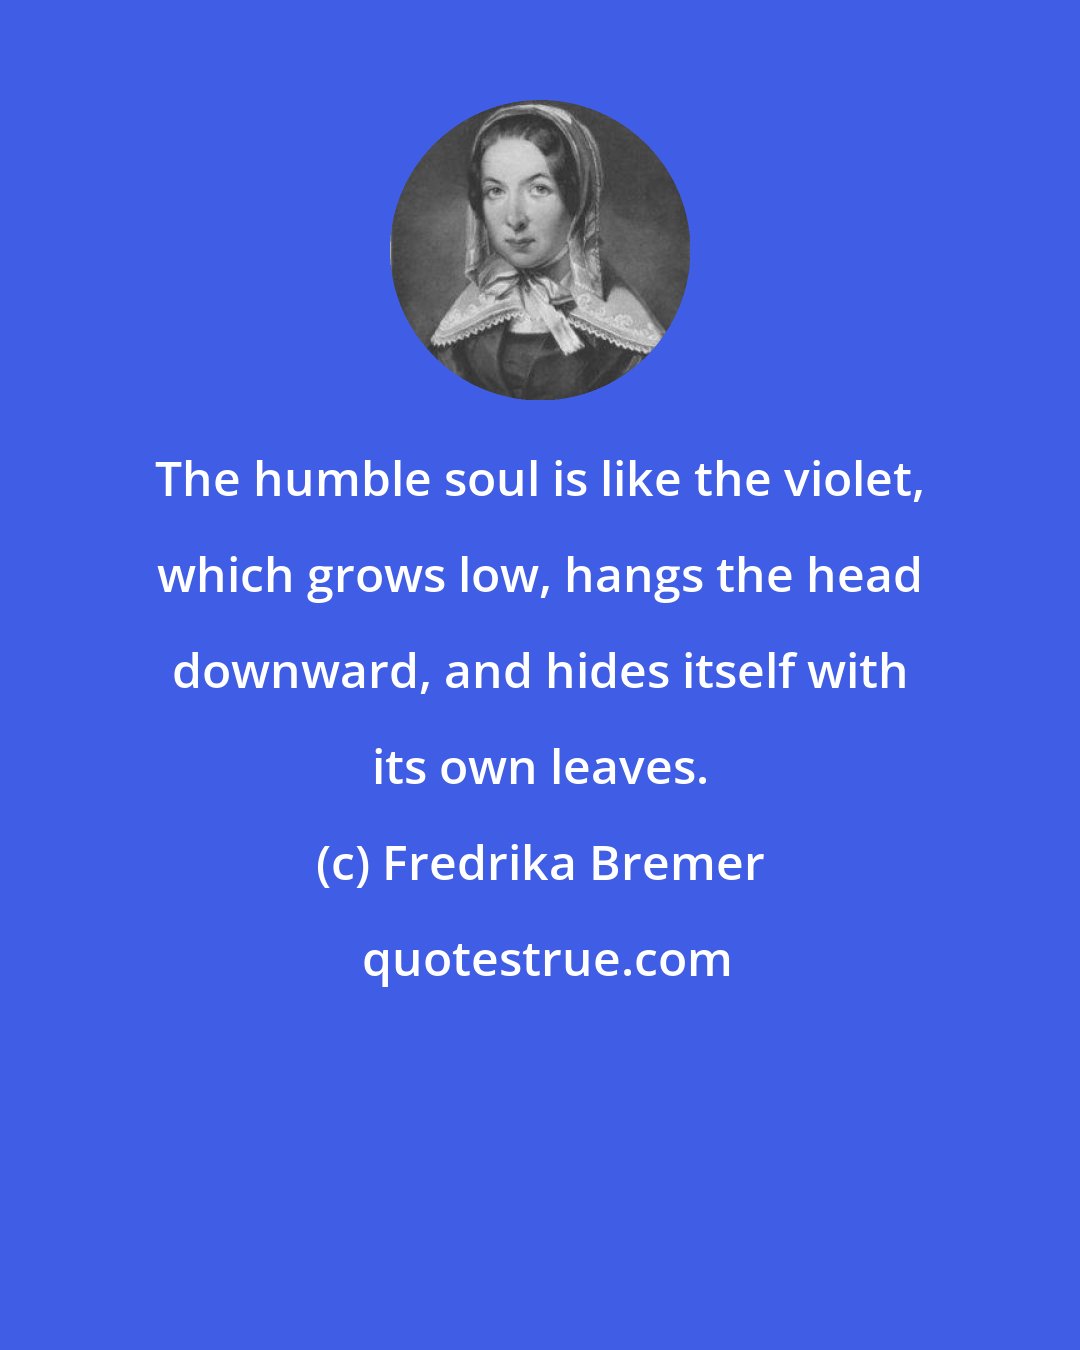 Fredrika Bremer: The humble soul is like the violet, which grows low, hangs the head downward, and hides itself with its own leaves.